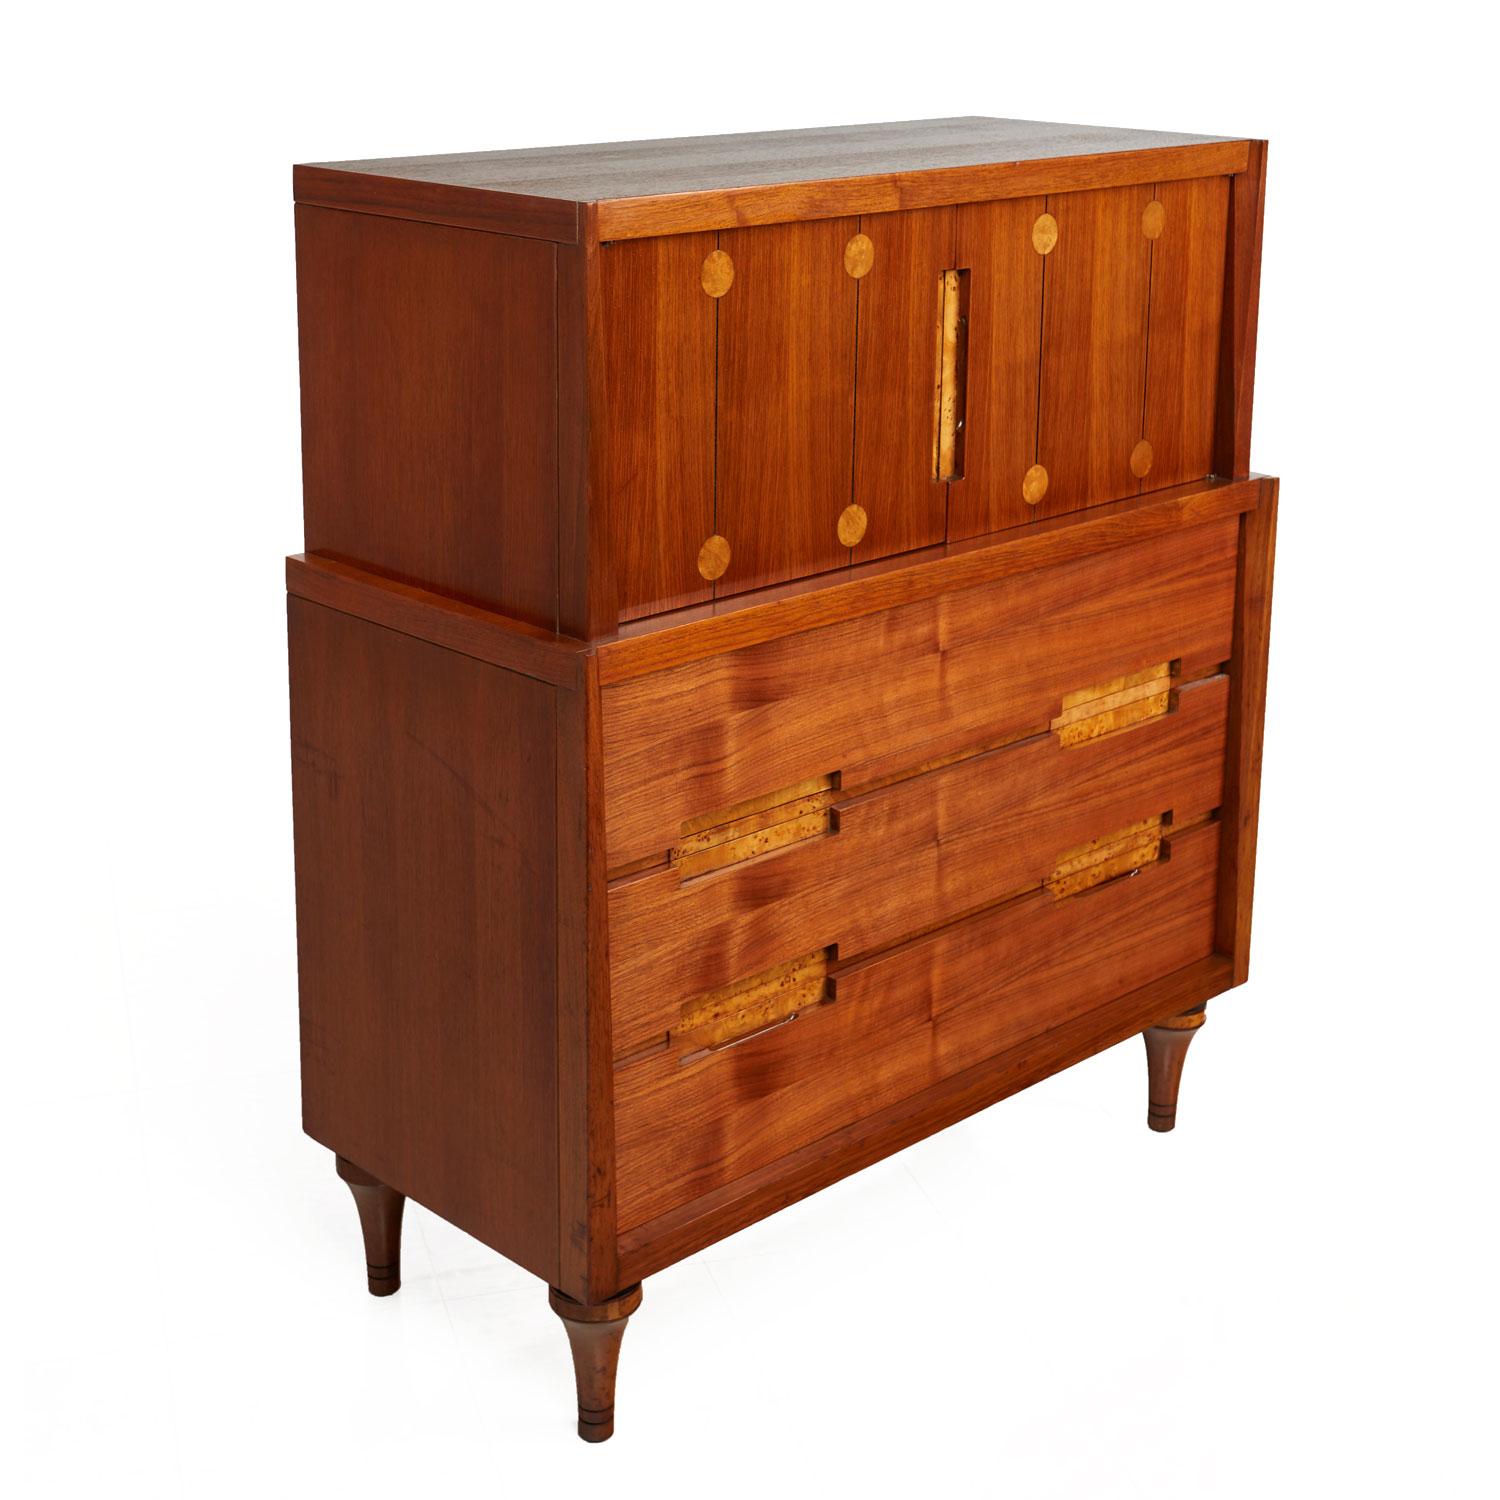 This exquisite highboy dresser / gentleman's chest is as beautiful and rare as it is bizarre. Made in the 1960s by Daniel Jones Inc. of New York. We've never seen a line with such exceptional detail and eclectic design elements. Made from a mix of